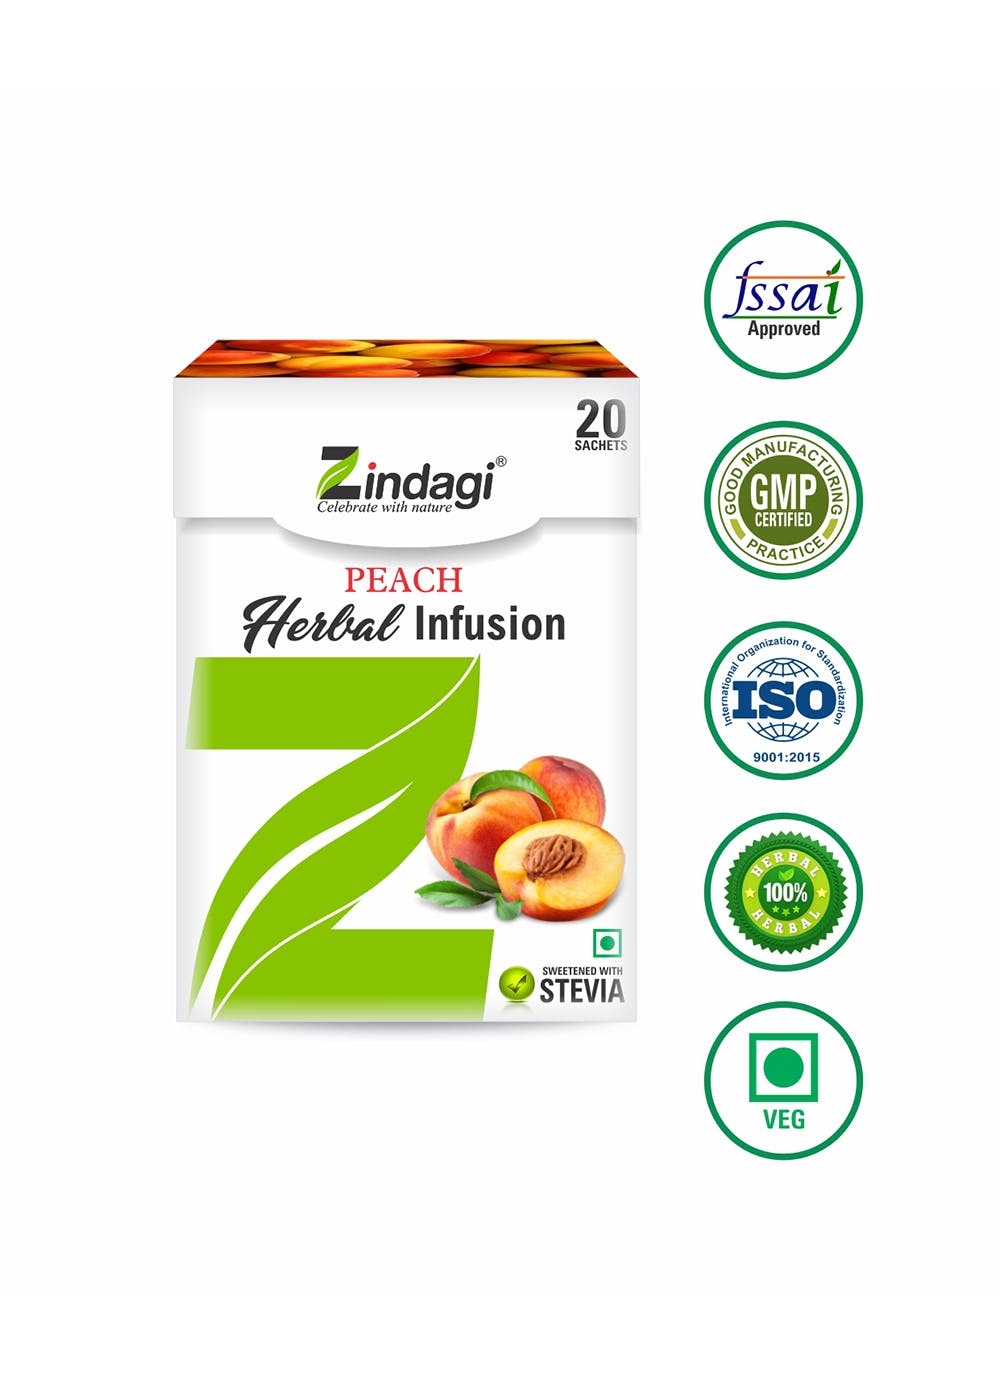 Peach Herbal Infusion - Natural & Fat Free Health Drink Sweeten With Stevia - Sugar Free Energy Drink (20 Sachets)